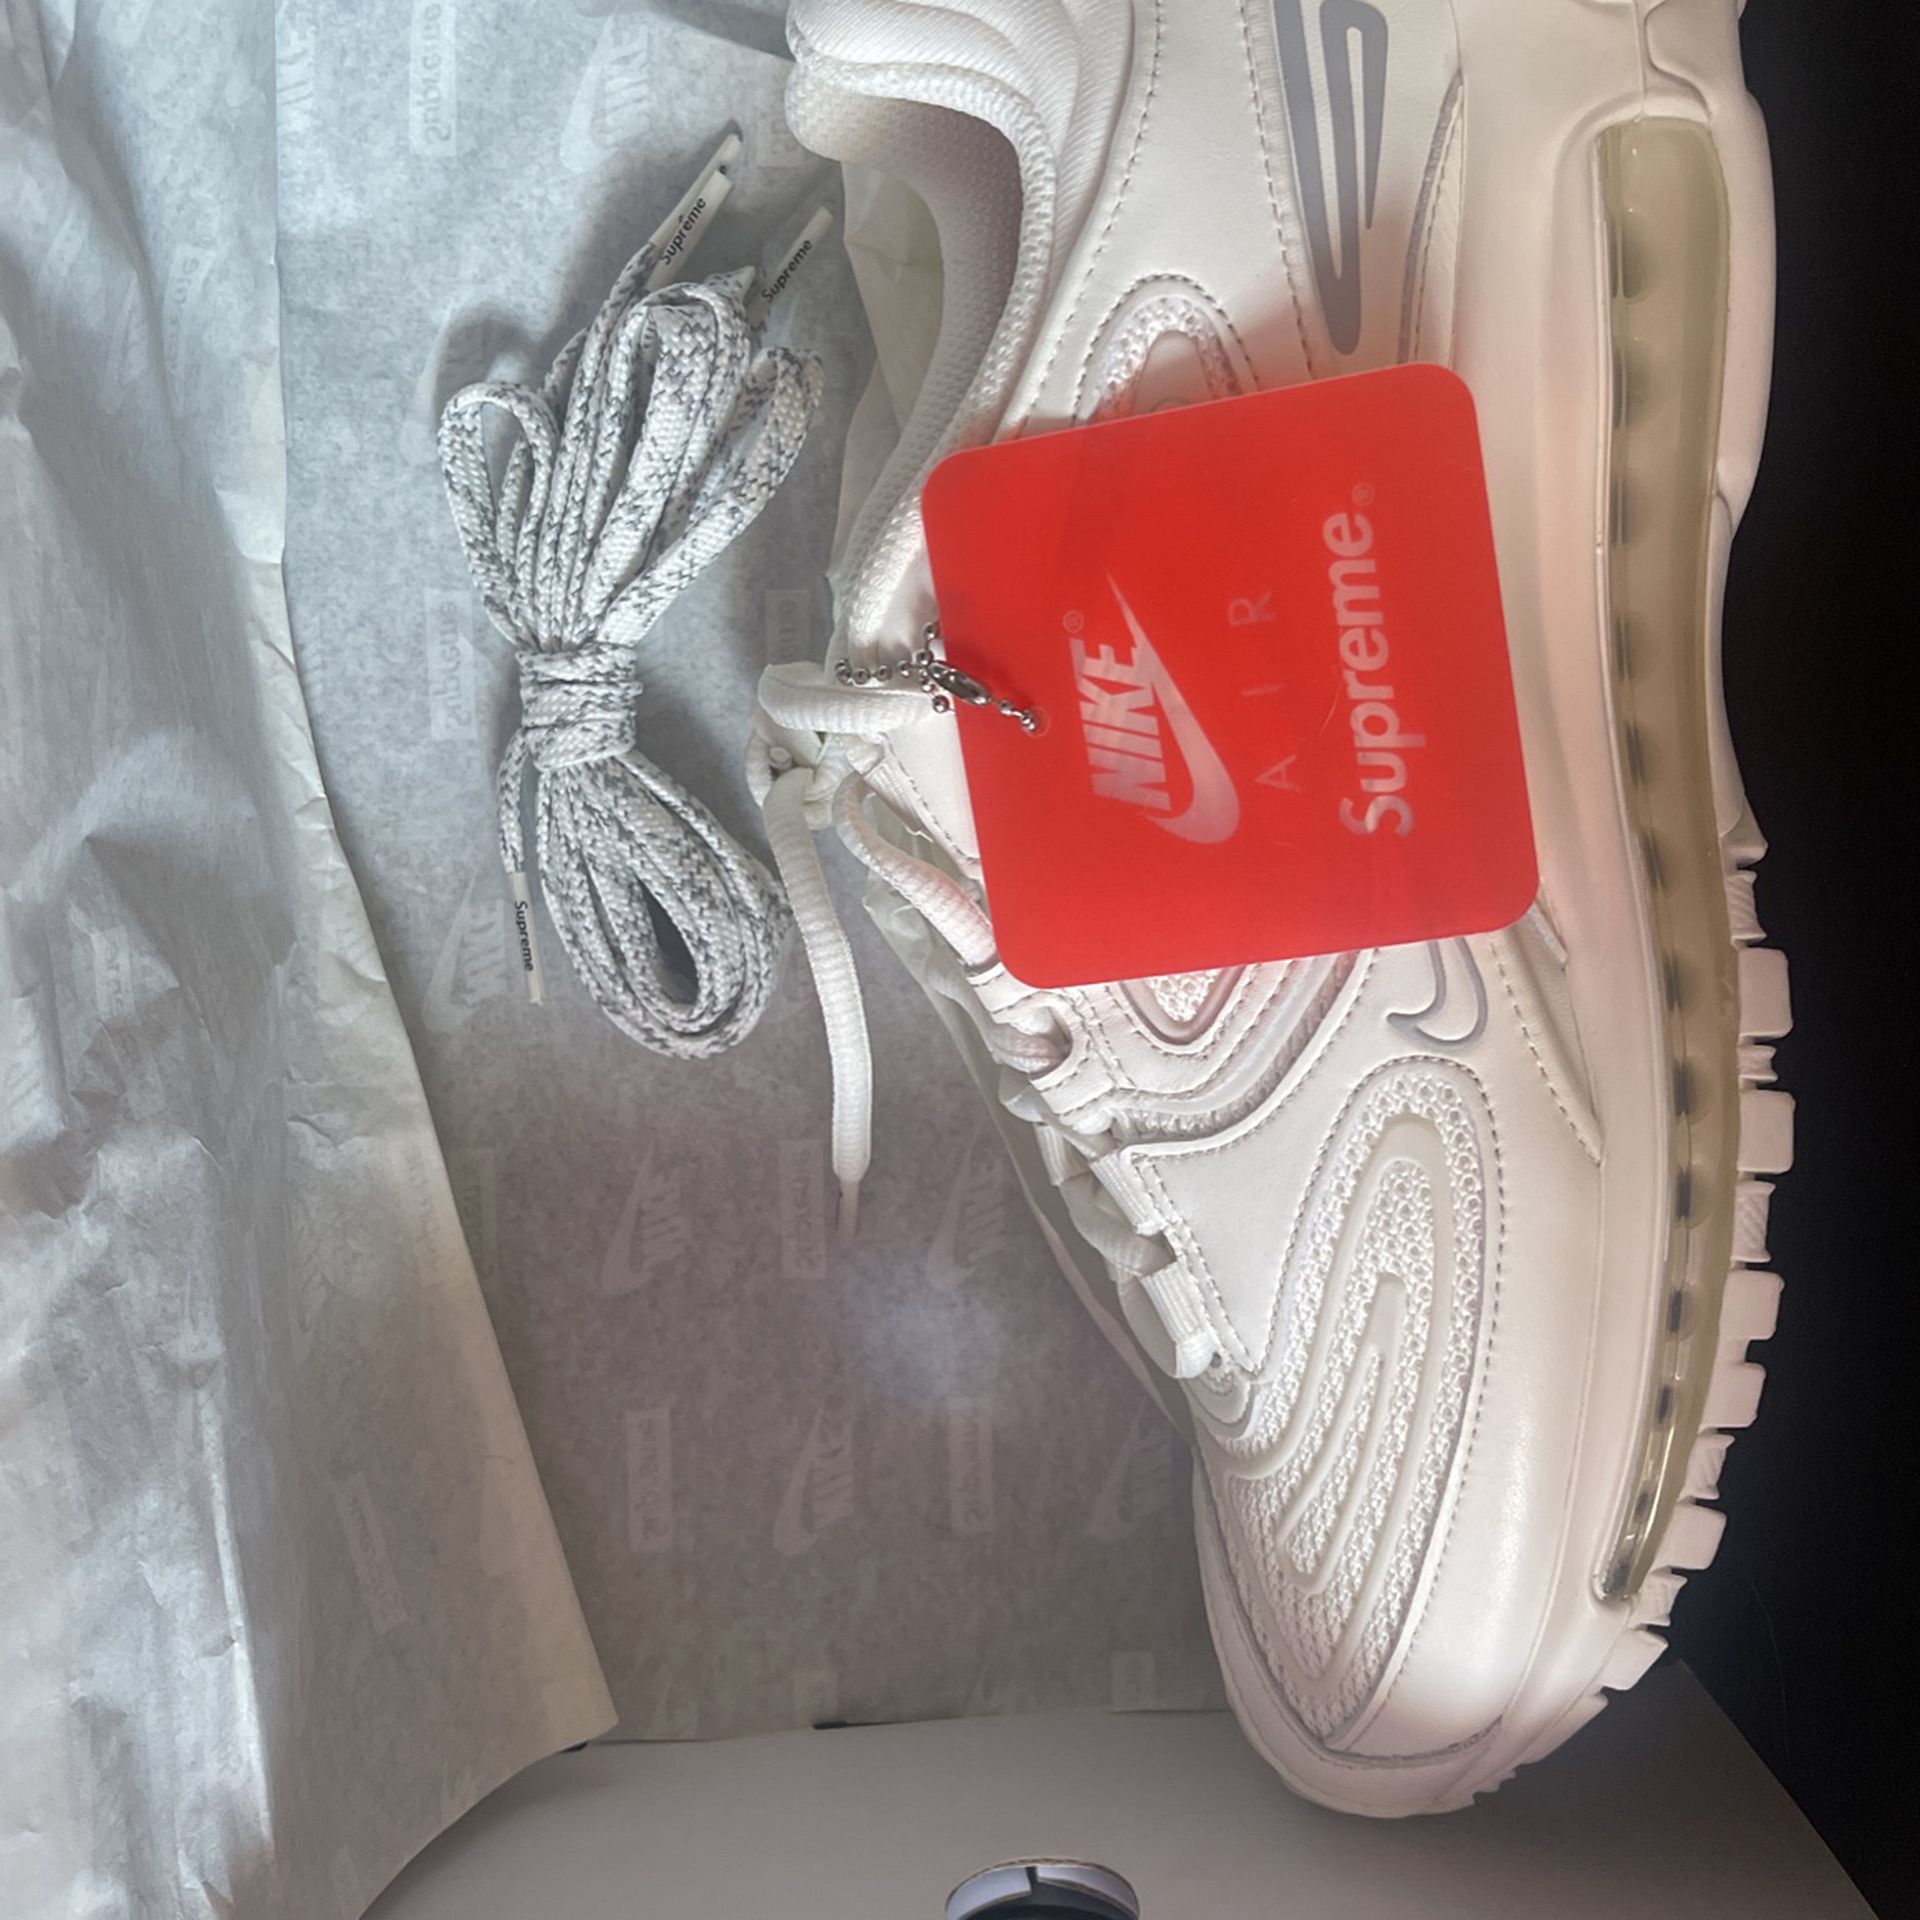 Supreme X Nike Air Max 98 TL for Sale in Los Banos, CA - OfferUp